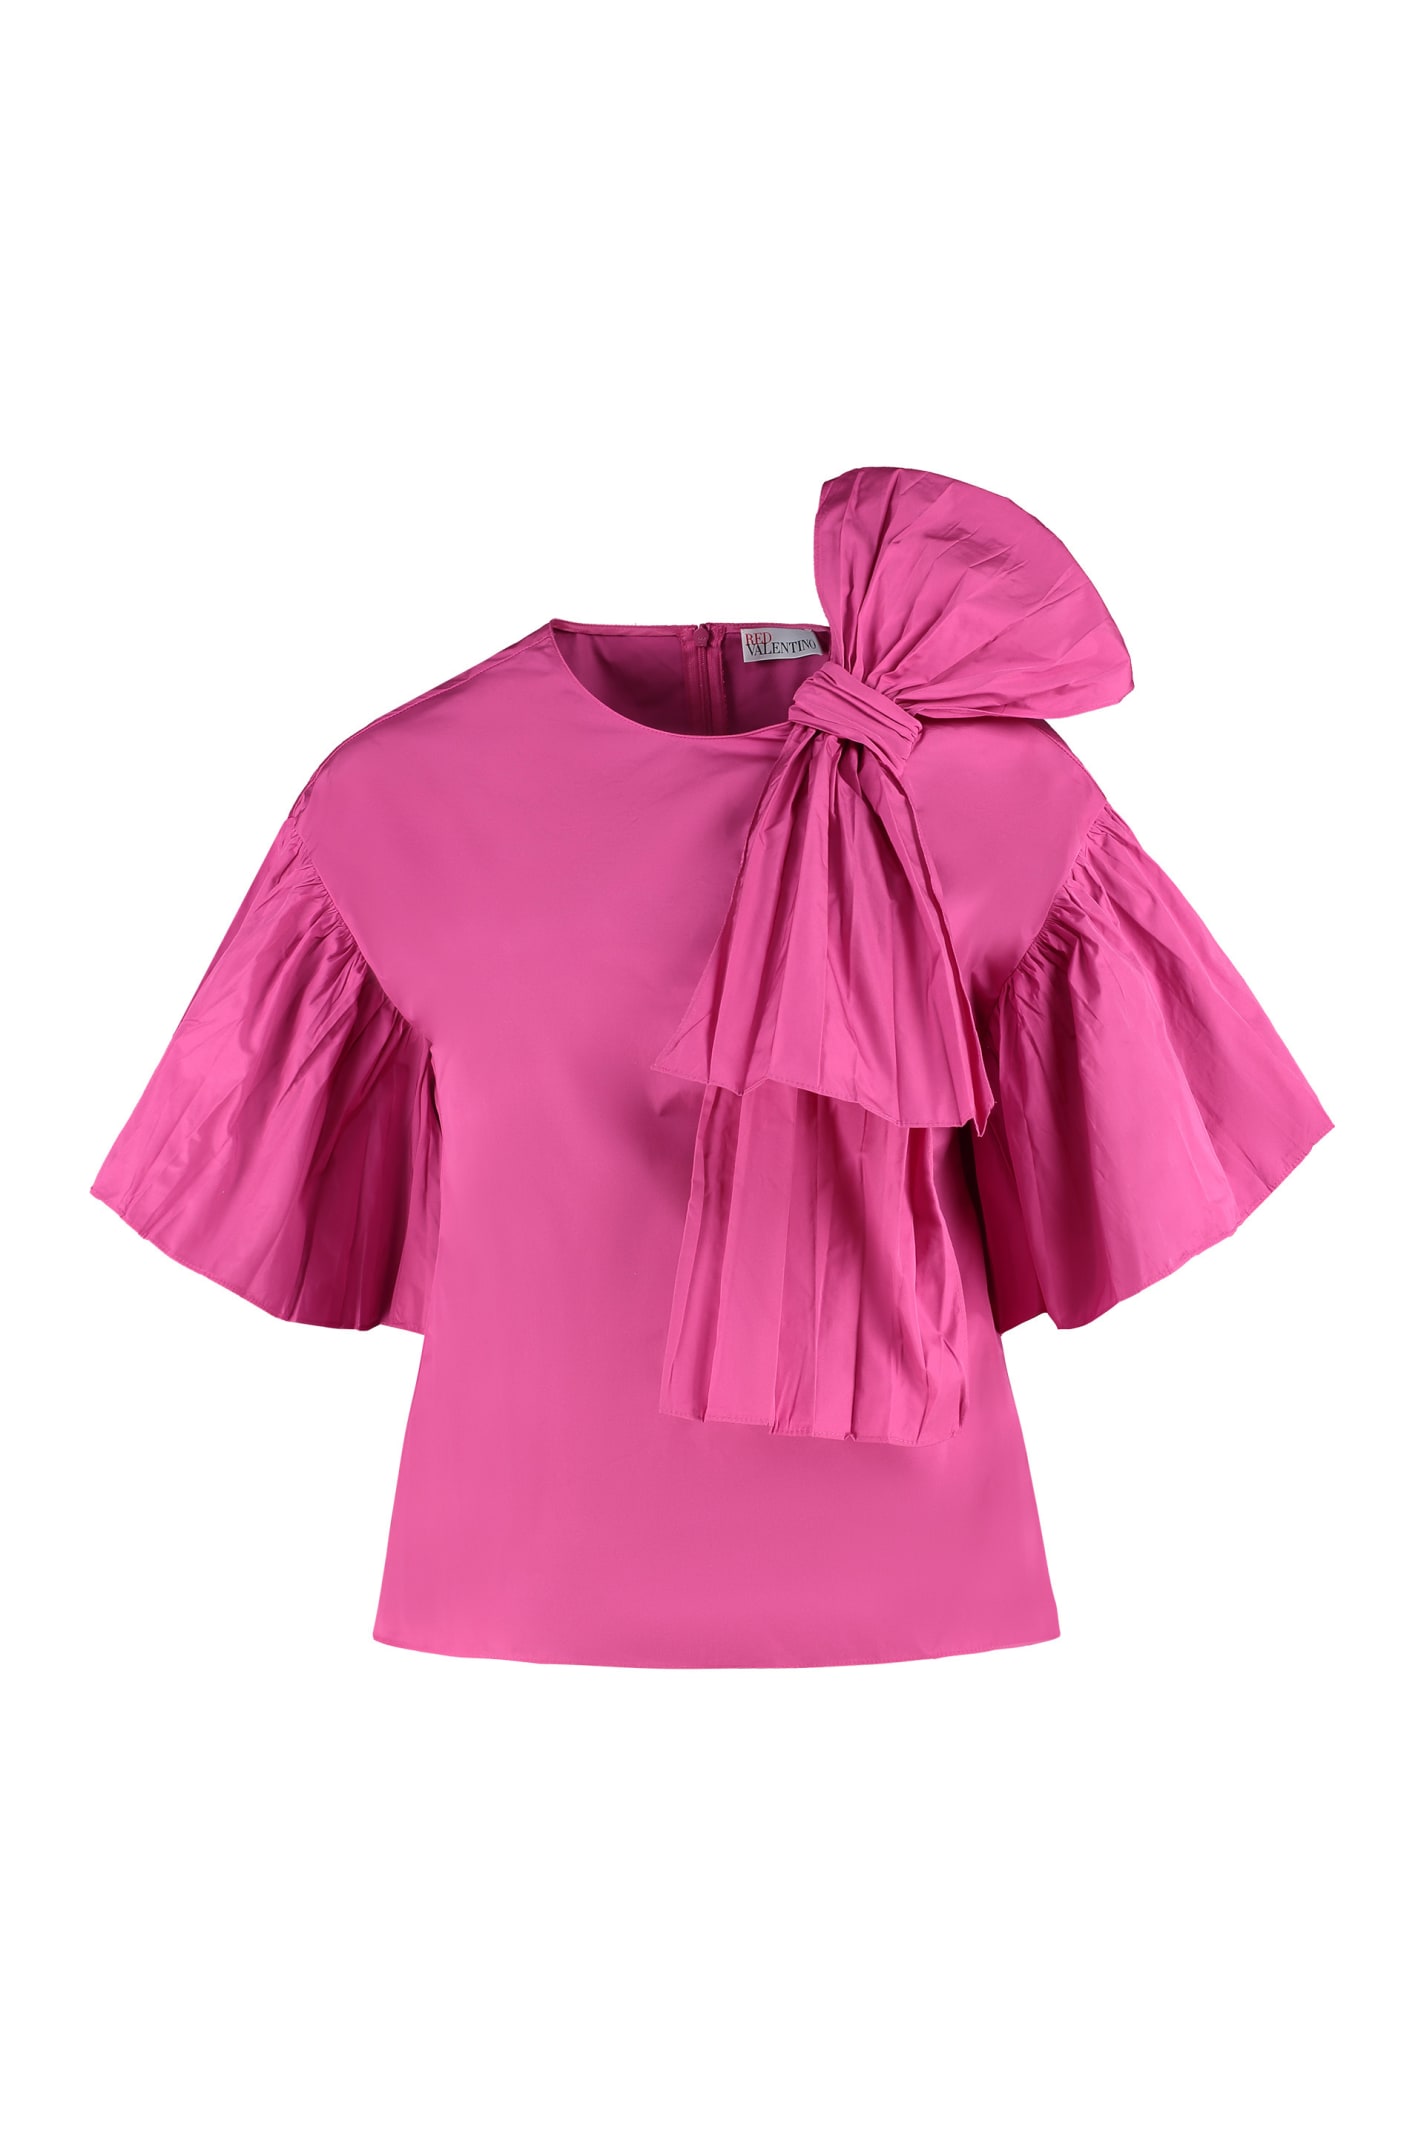 RED Valentino Bow-detail Blouse